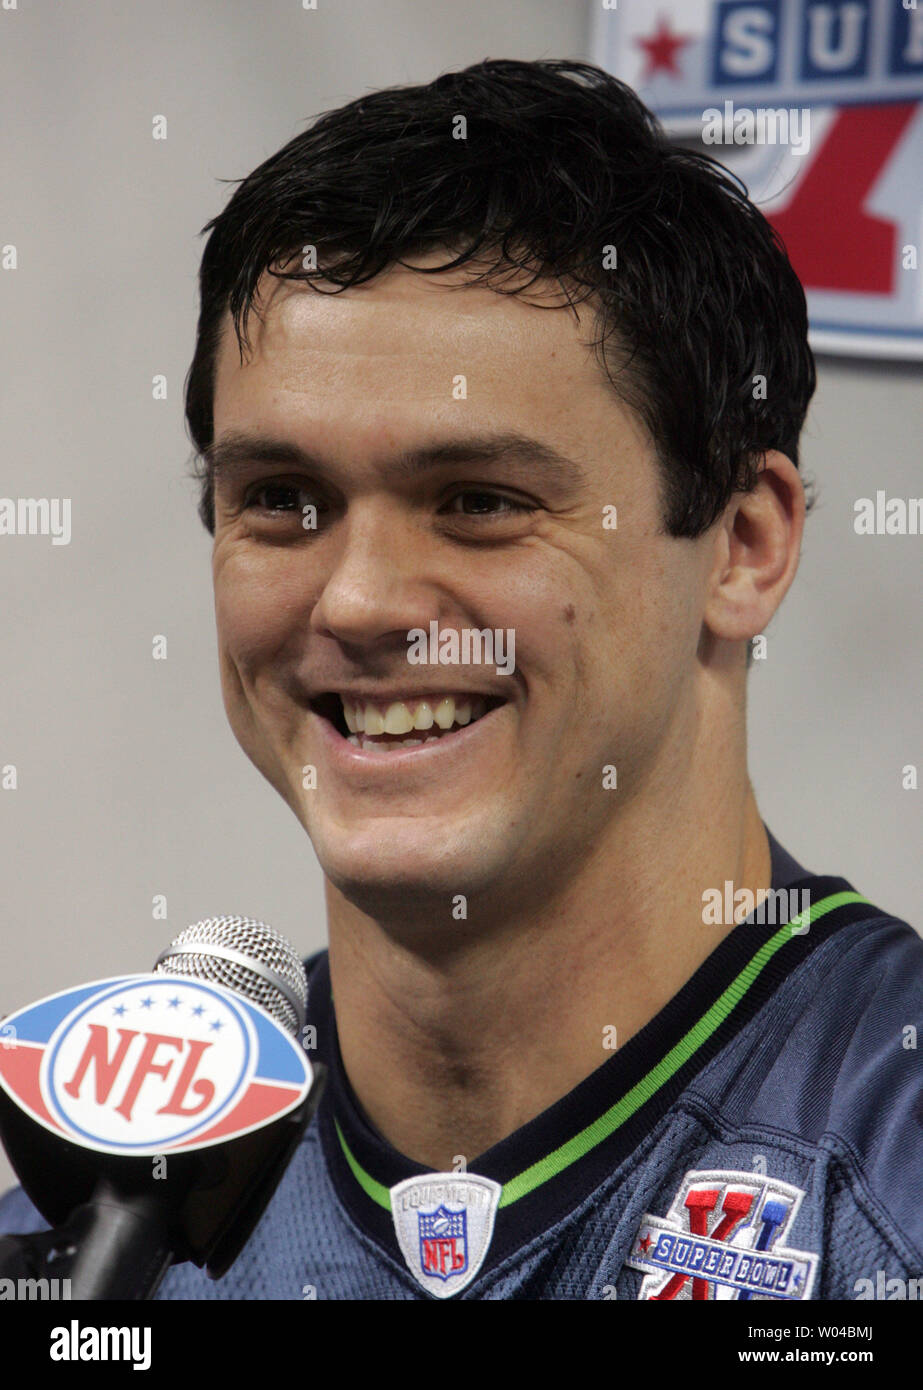 Seahawks wide receiver Joe Jurevicius answers questions from the media  during the Seattle Seahawks' Superl Bowl XL Media Day at Ford Field in  Detroit on January 31, 2006. The Pittsburgh Steelers will